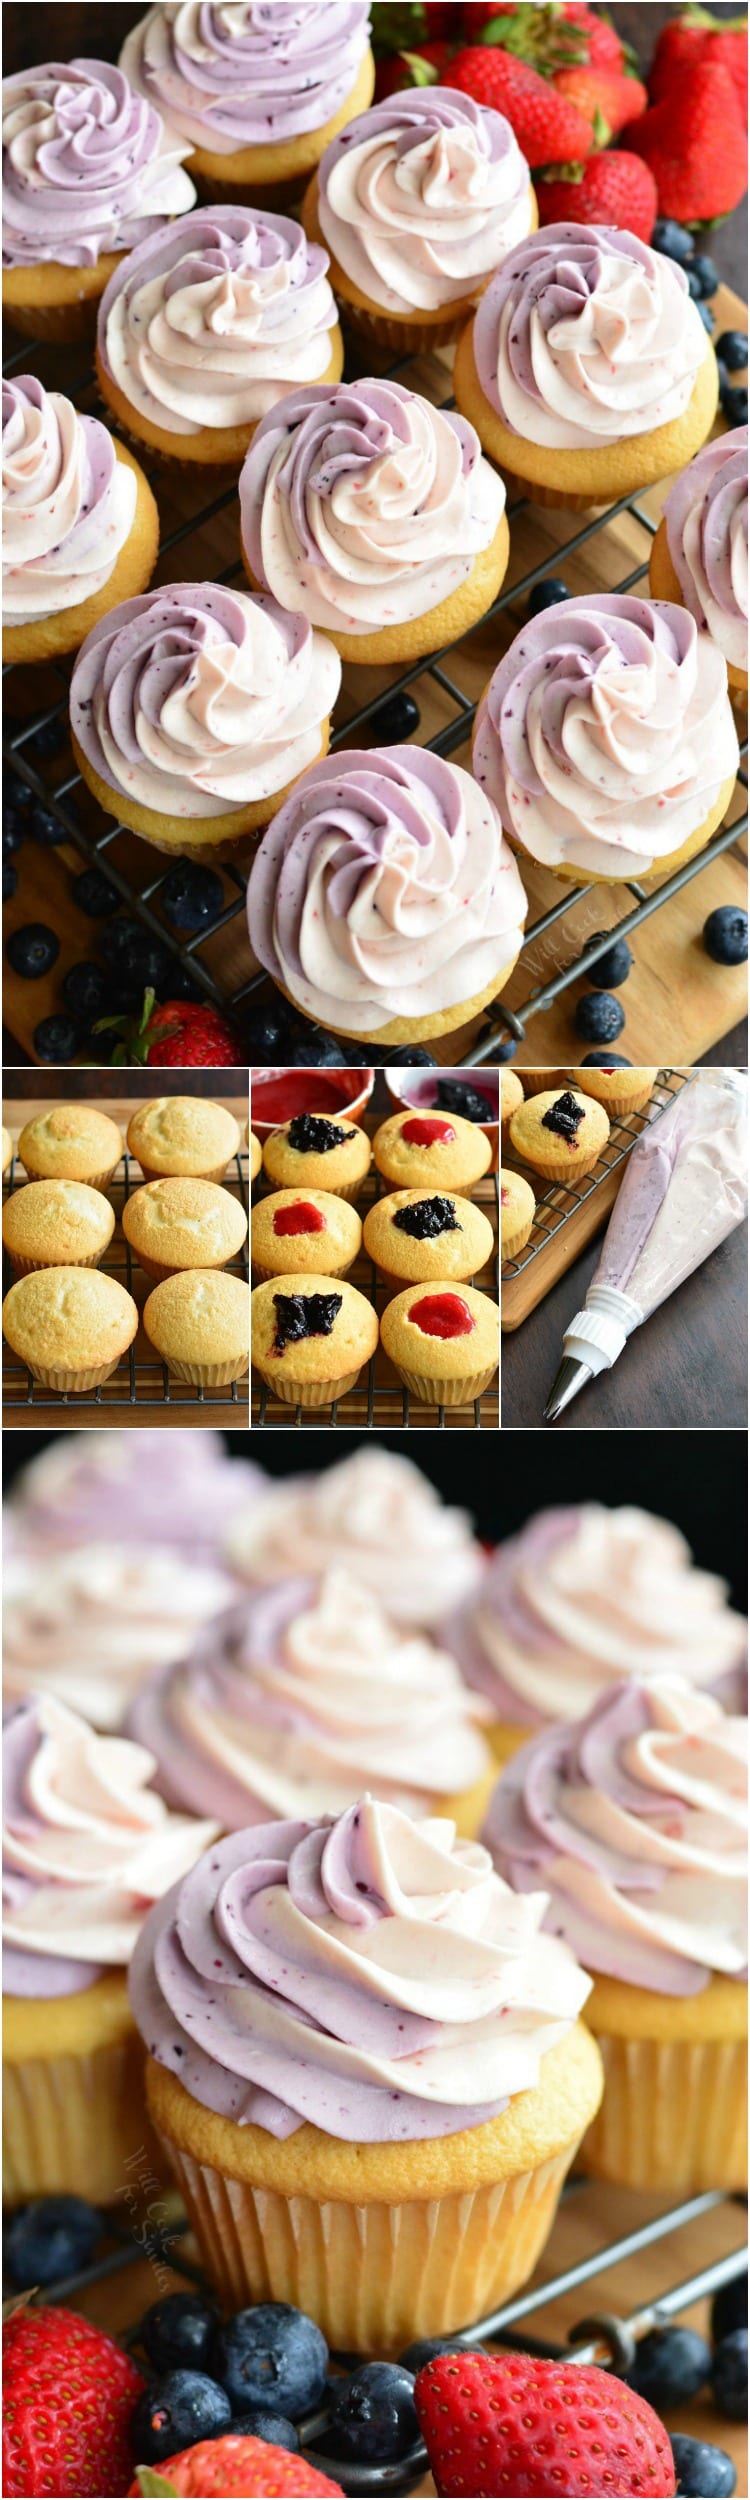 collage of berry filled cupcakes with strawberry and blueberry frosting.